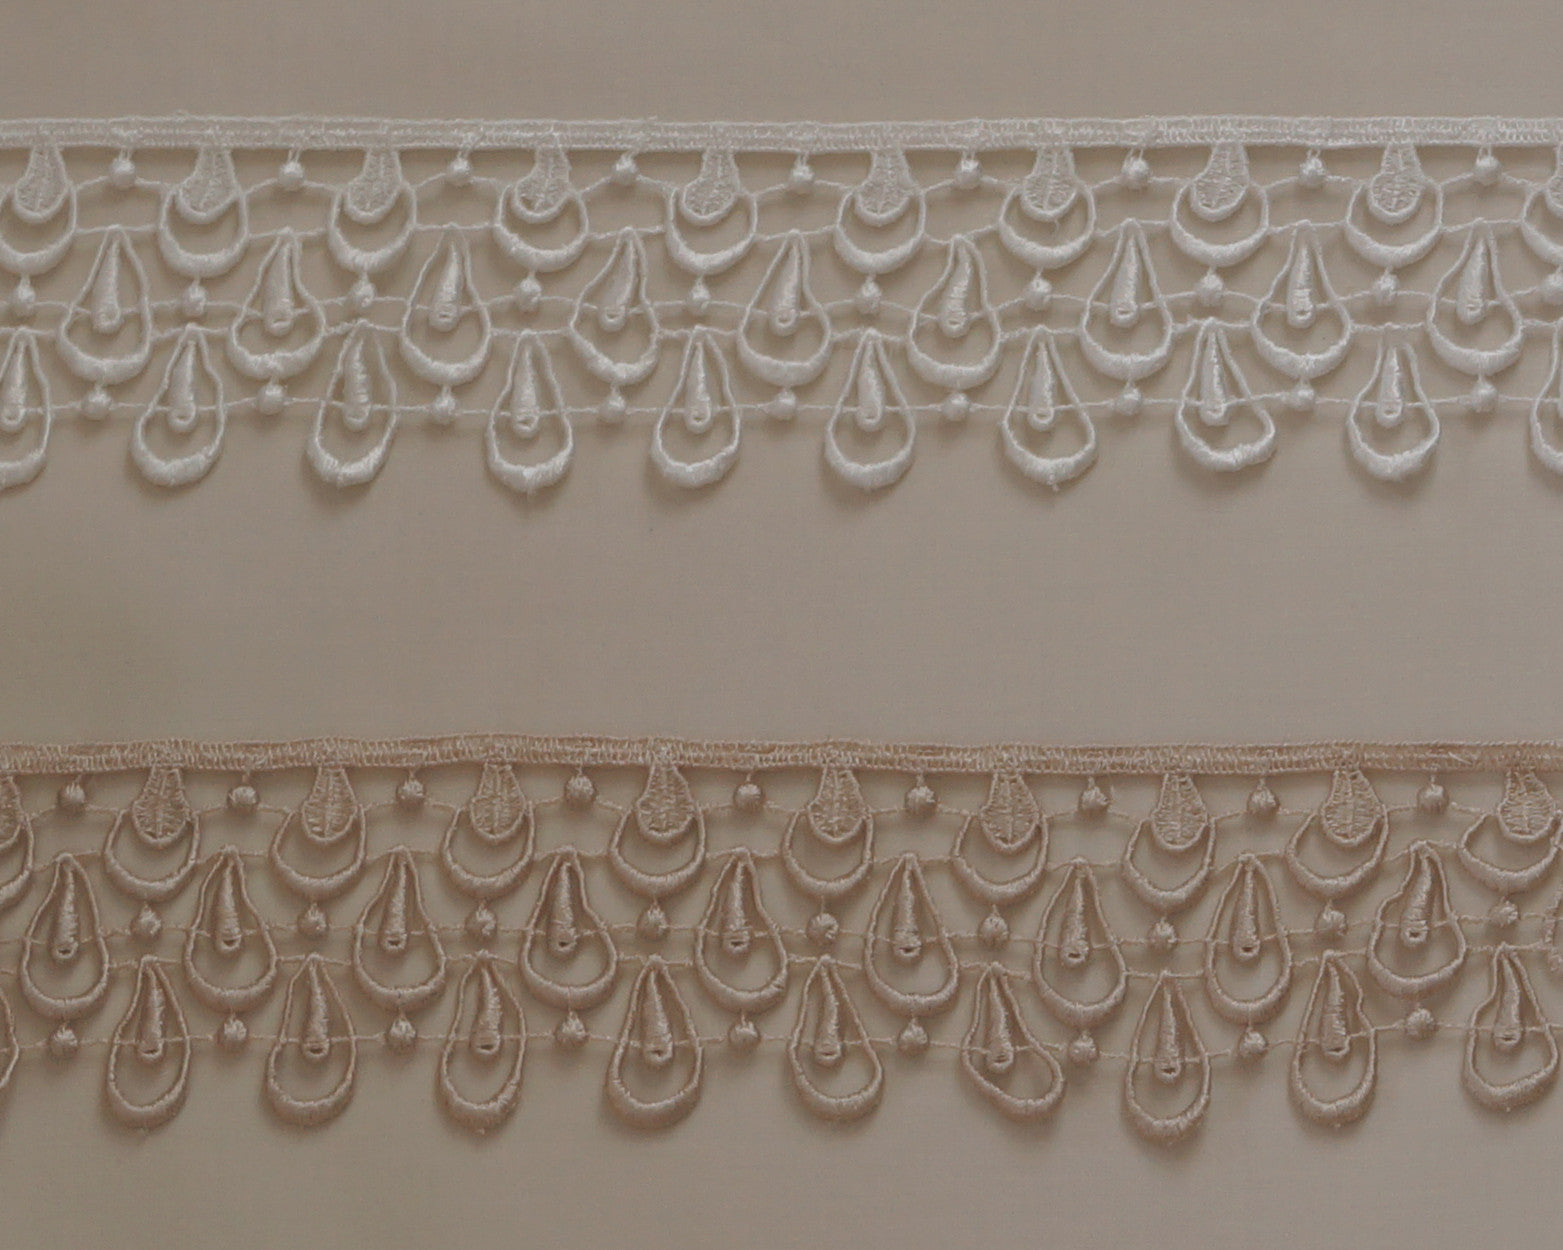 2 1/4" lace edging with tear drop like design in off white or taupe.